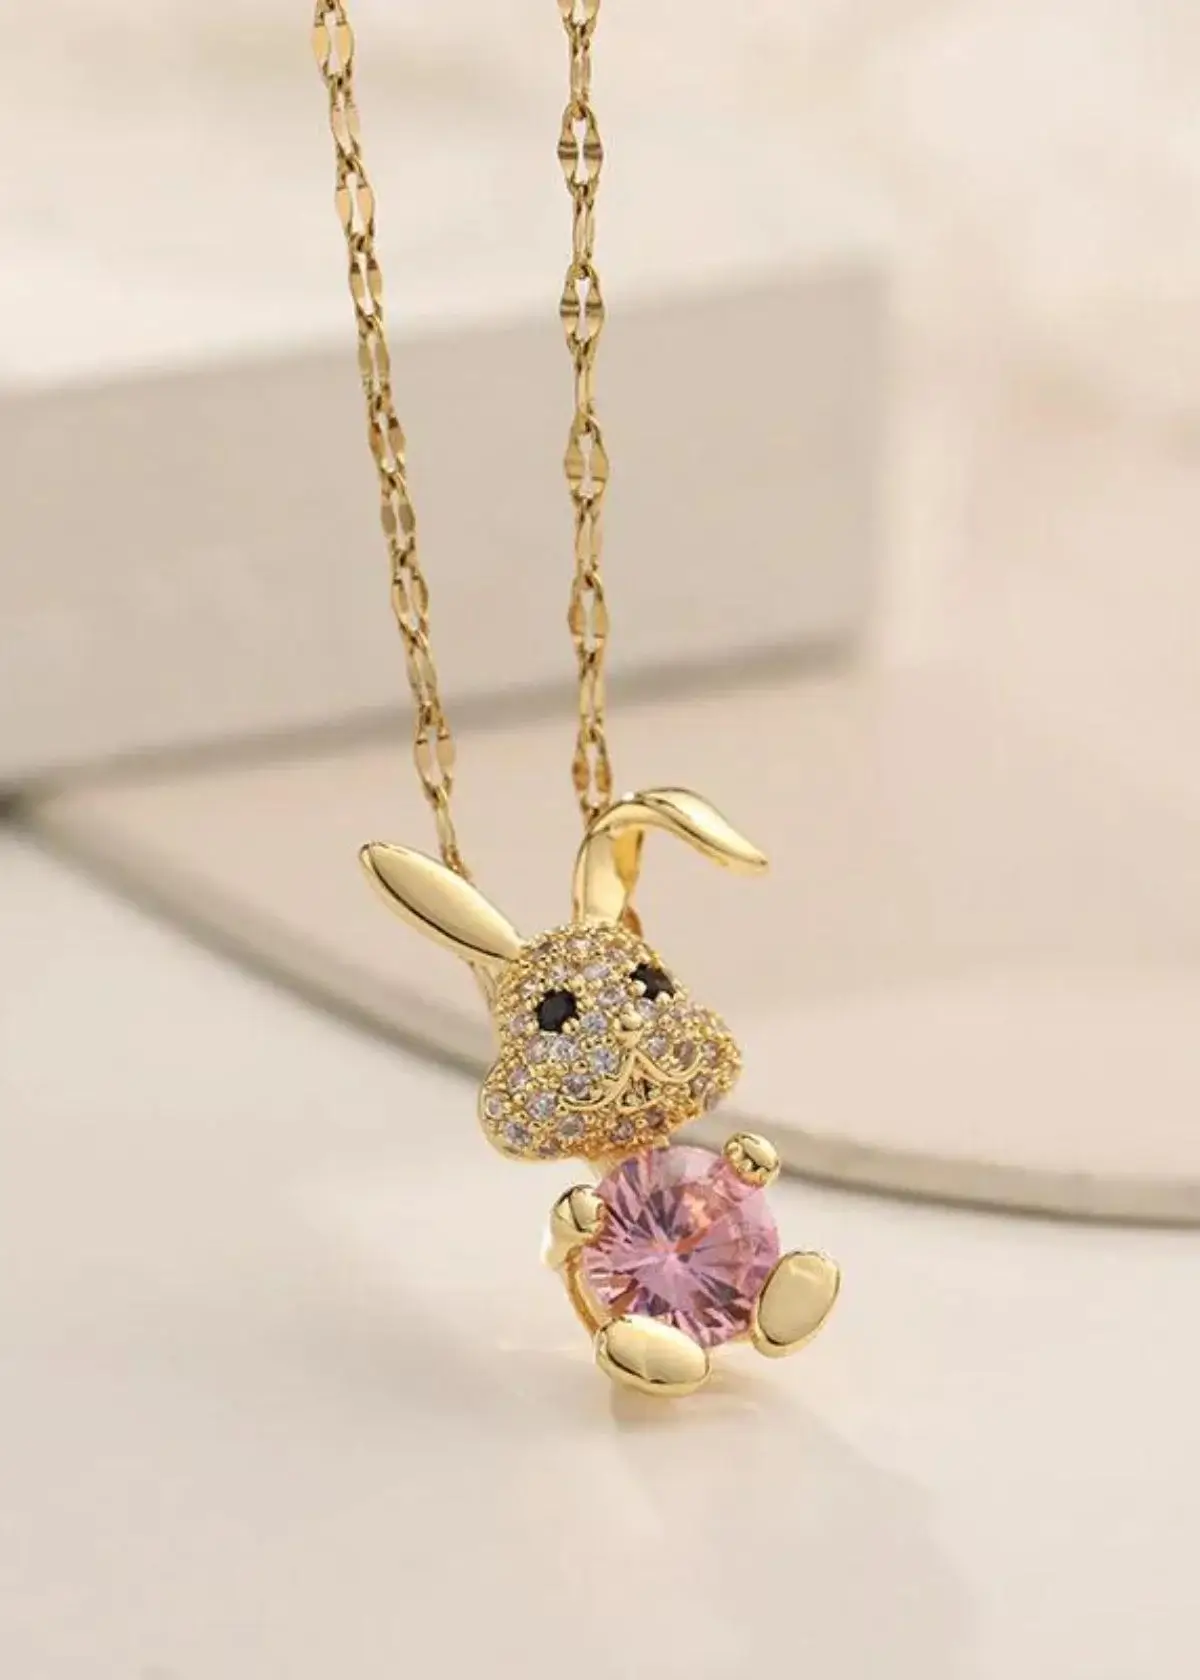 How do you clean a bunny necklace?